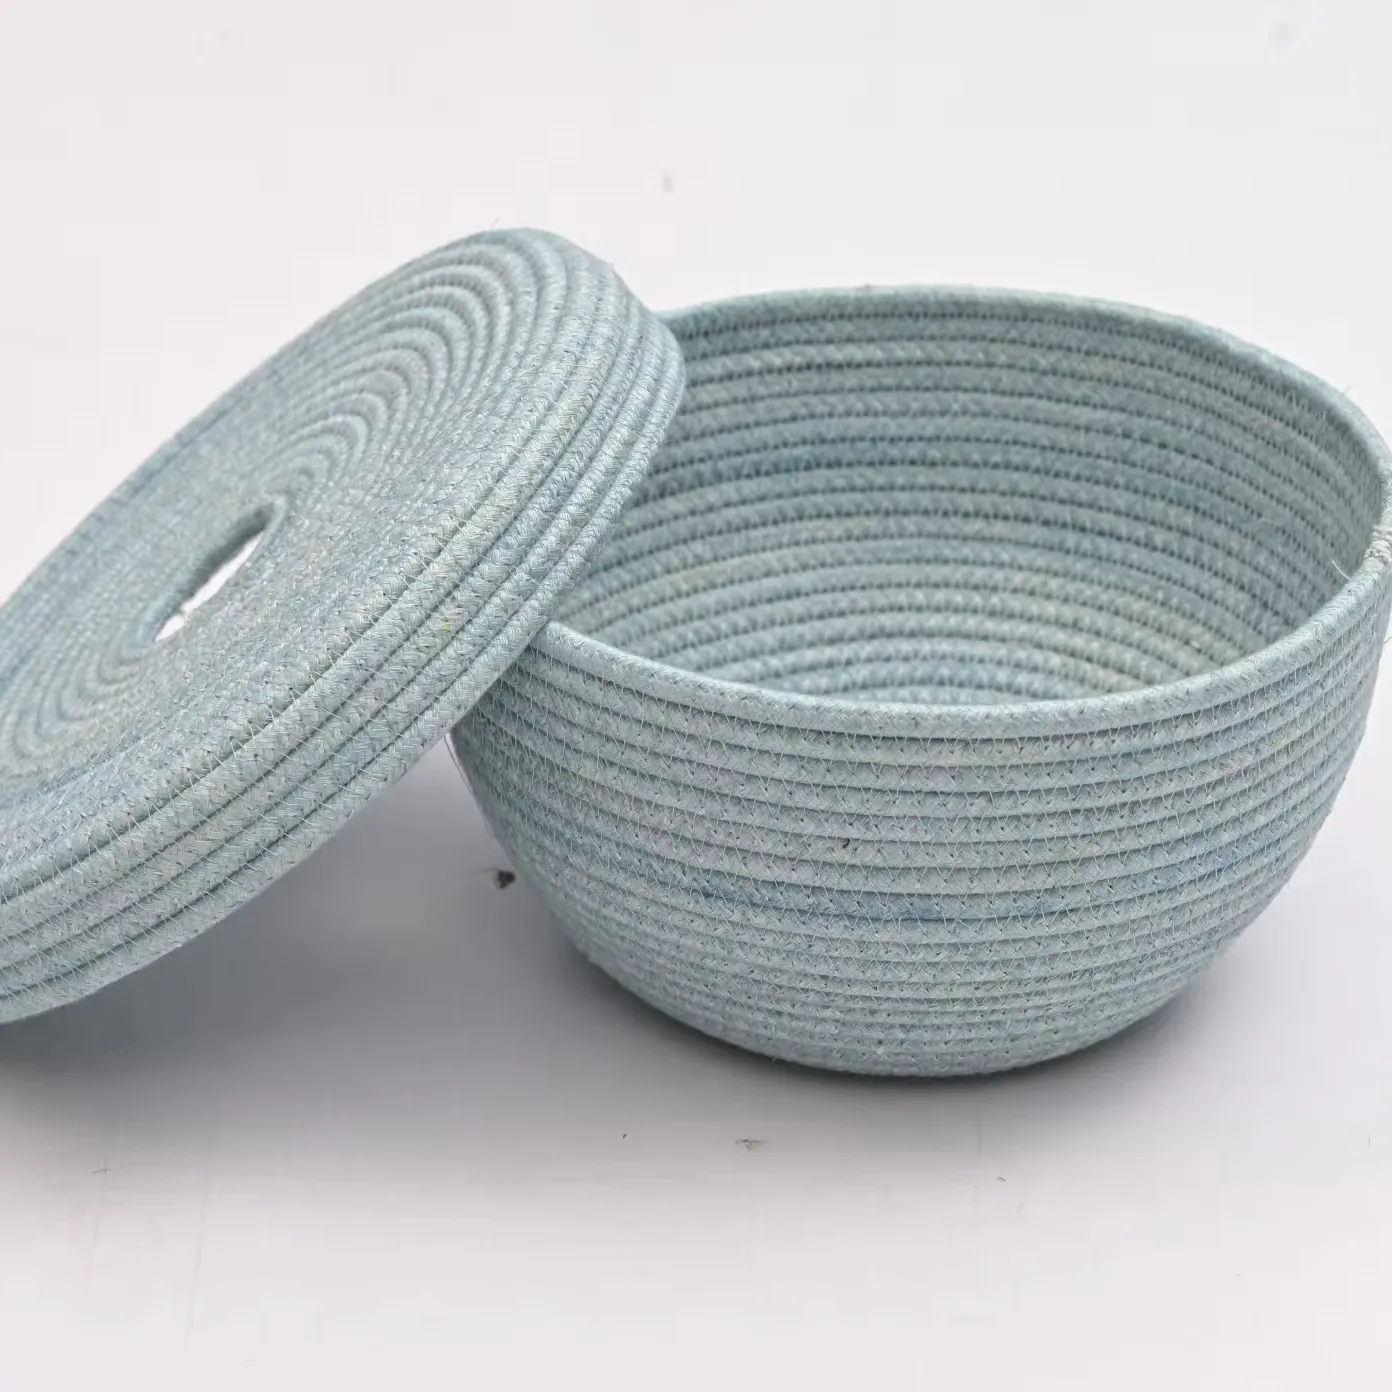 Woven Cotton Rope Storage Basket with Lid Organizing Accessories set of 2